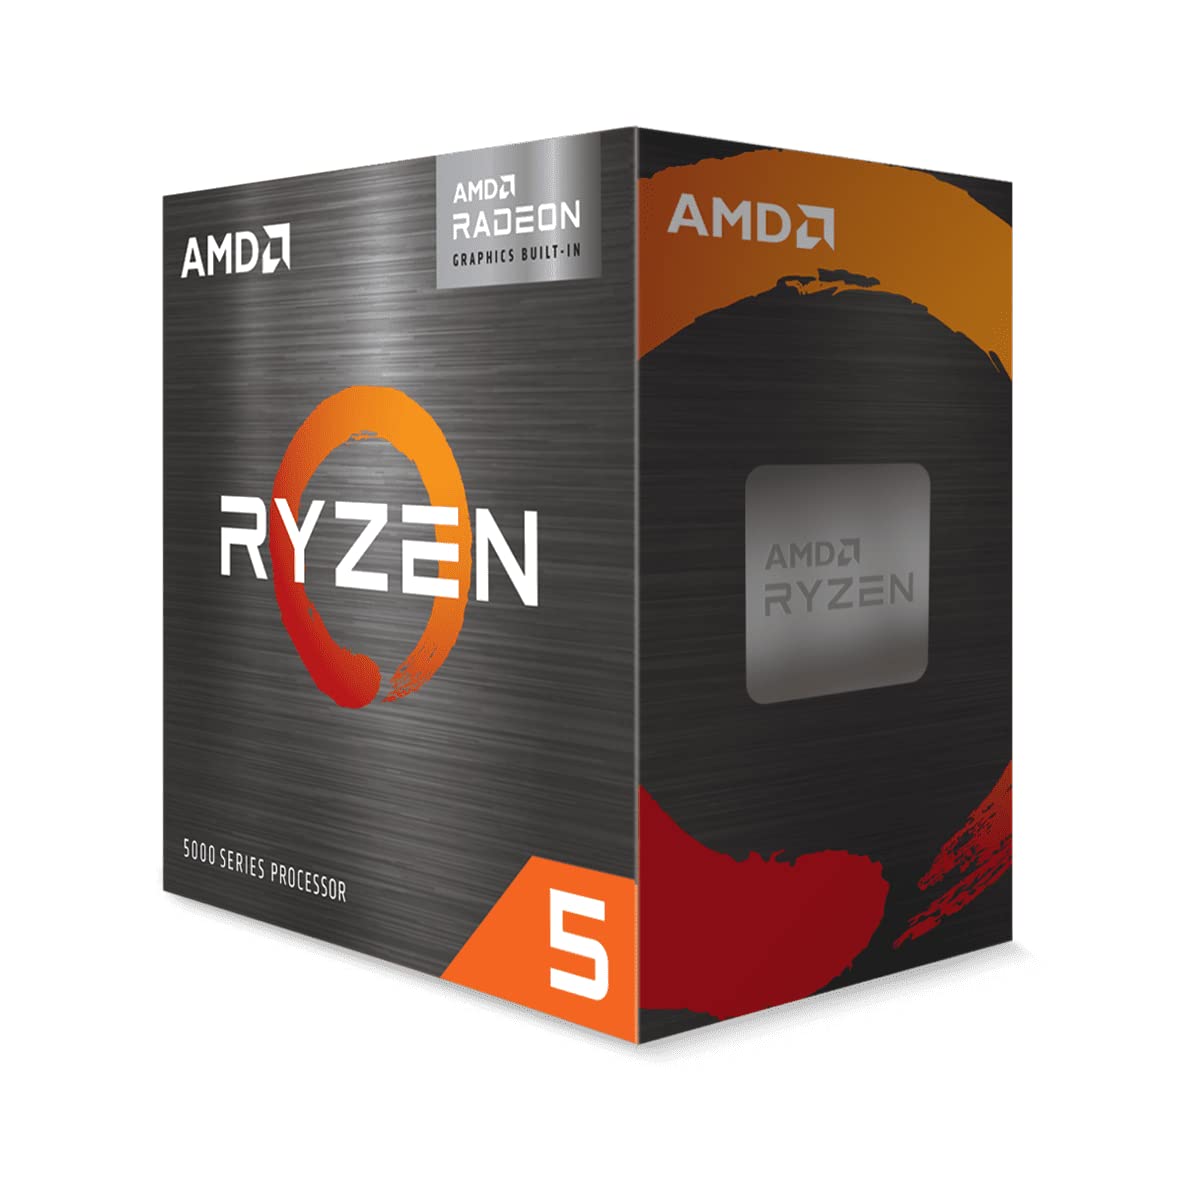 AMD Ryzen 5 5600G Processor With Radeon Graphics 6 Cores & 12 Threads, 19 MB Cache. Turbo Boost :Yes-Processor-dealsplant